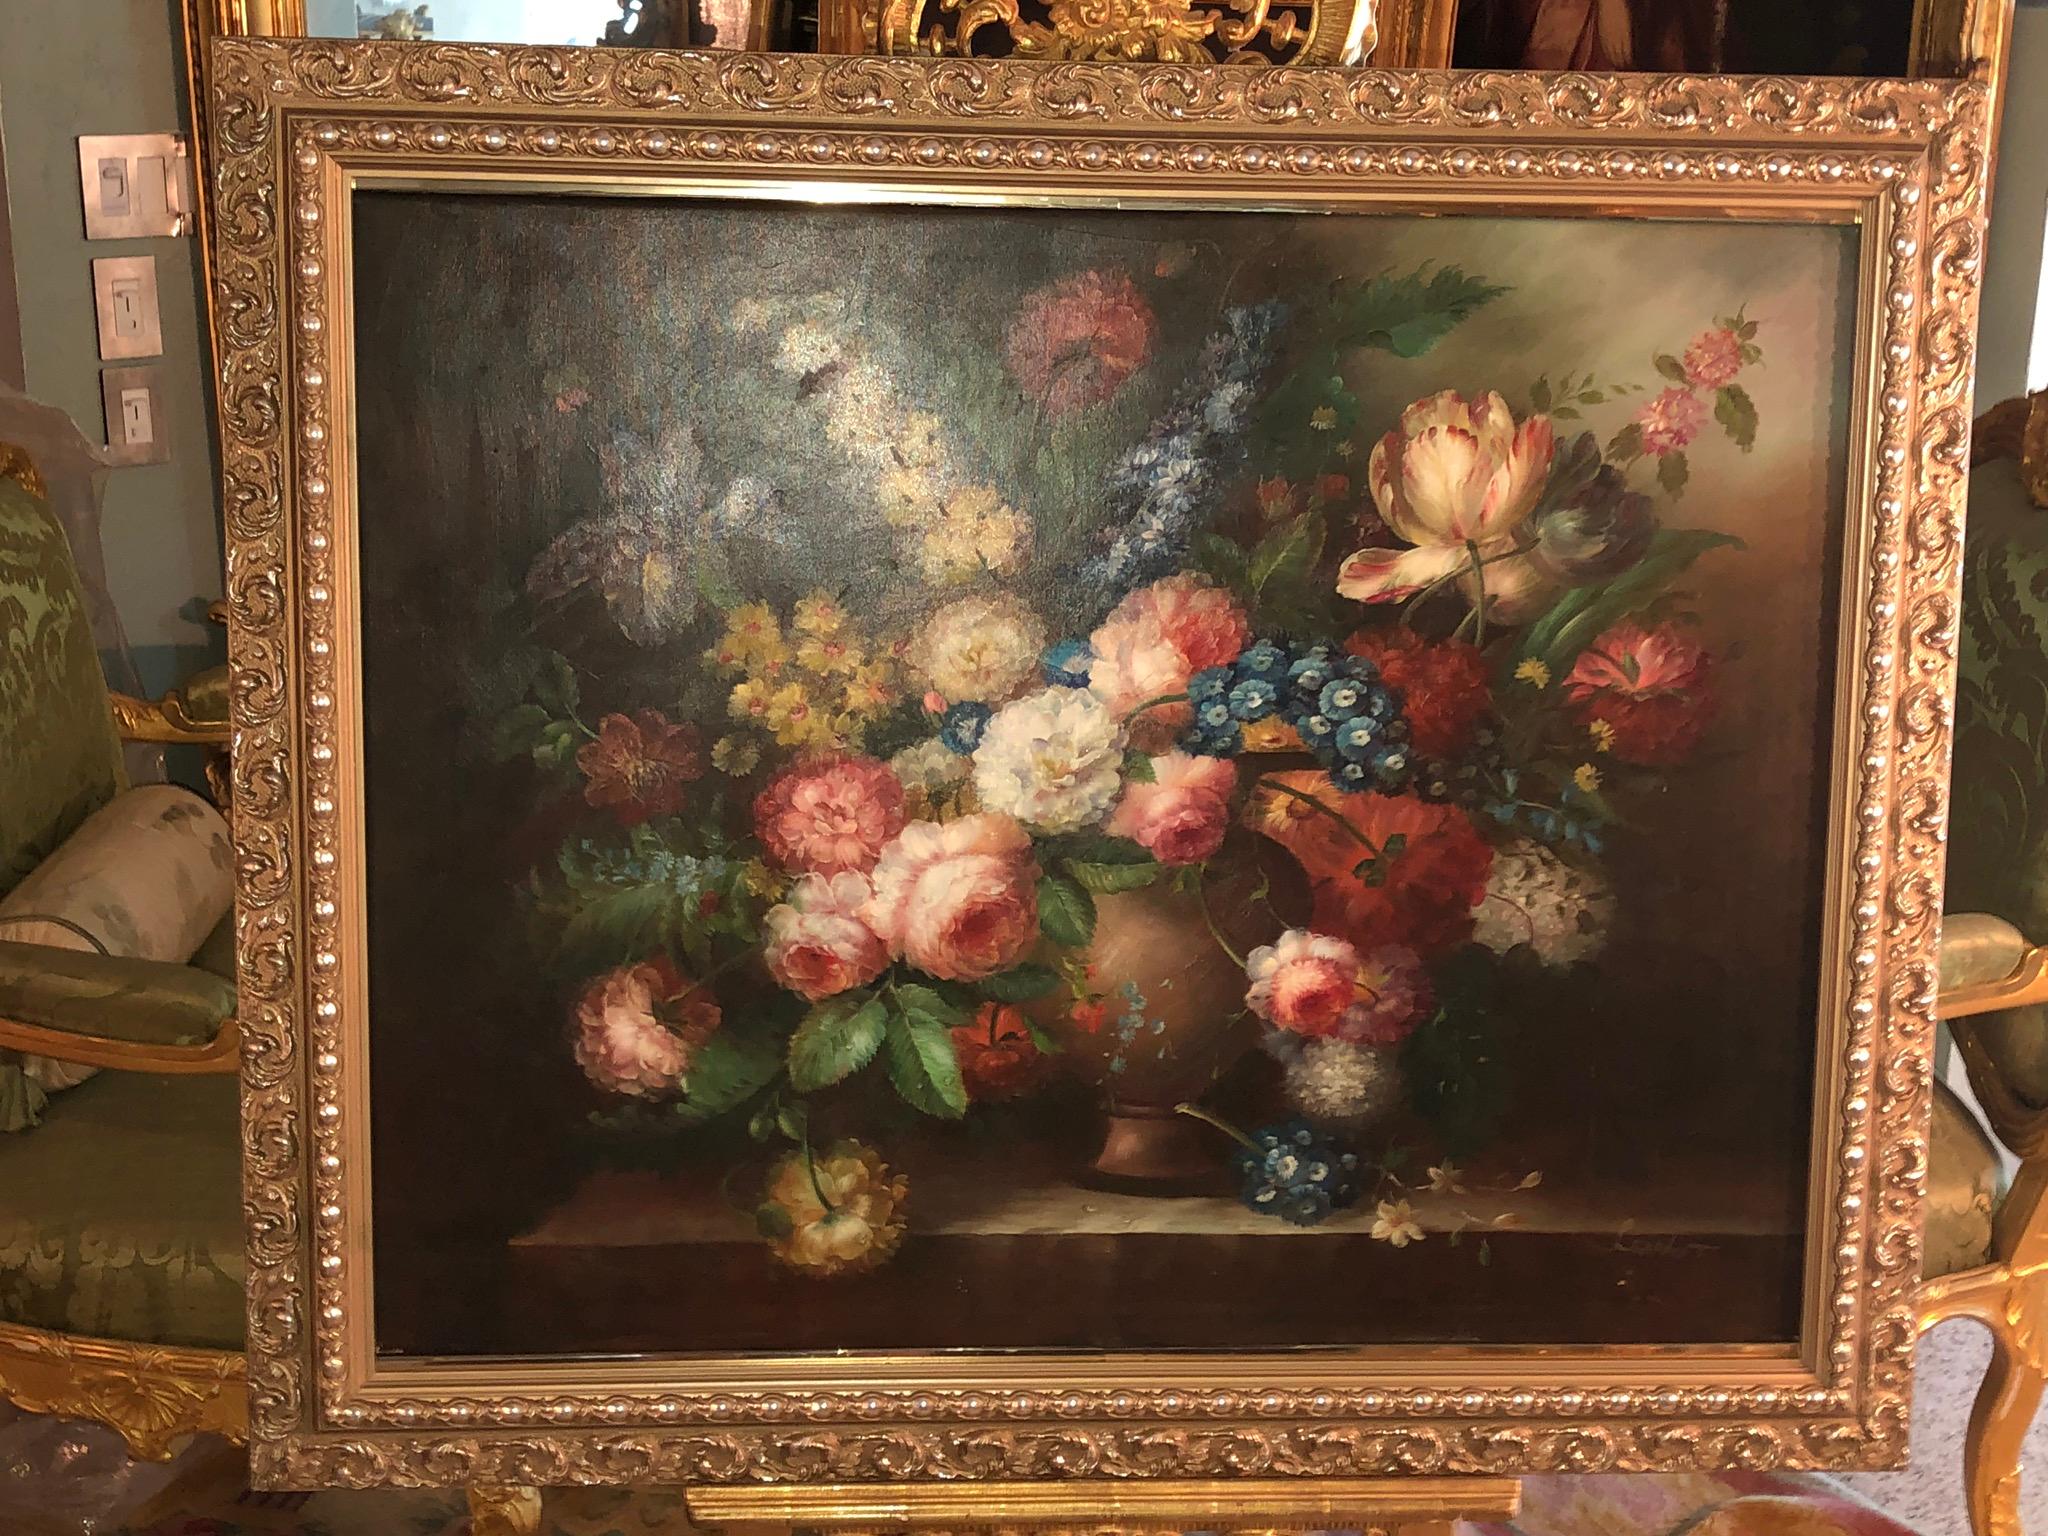 This large (signed) oil painting, is a truly beautiful floral display in paint, richly colored in various shades of peach, pink, cream, blues, yellow, orange, lavender and green making for a large burst of elegant color.
Peonies, bluebells, iris,